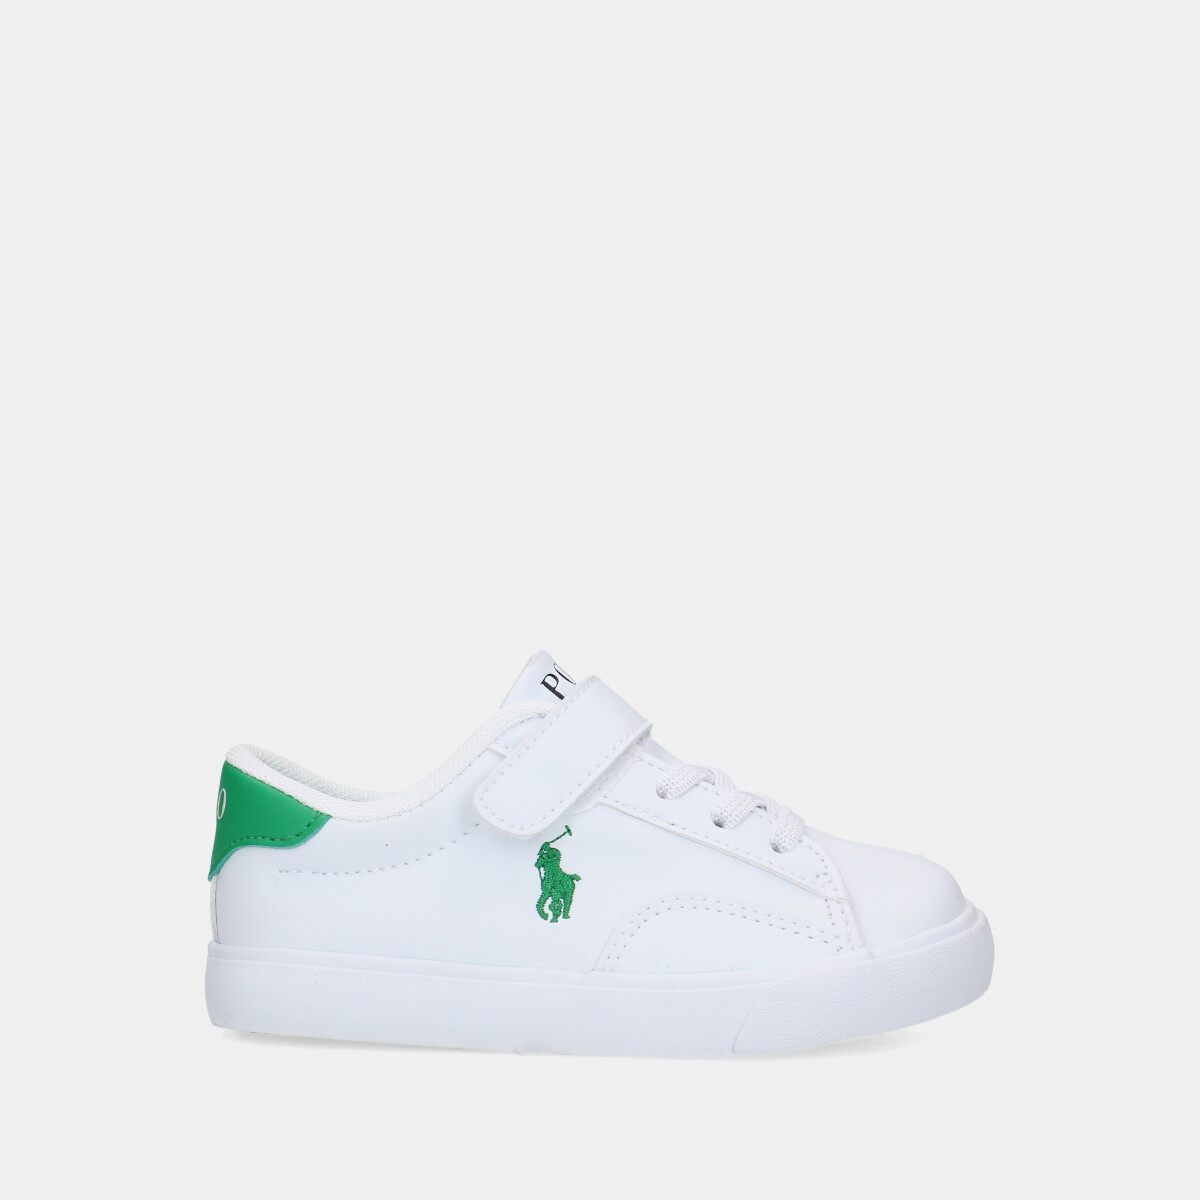 Polo Ralph Lauren Theron V PS White - Green peuter sneakers